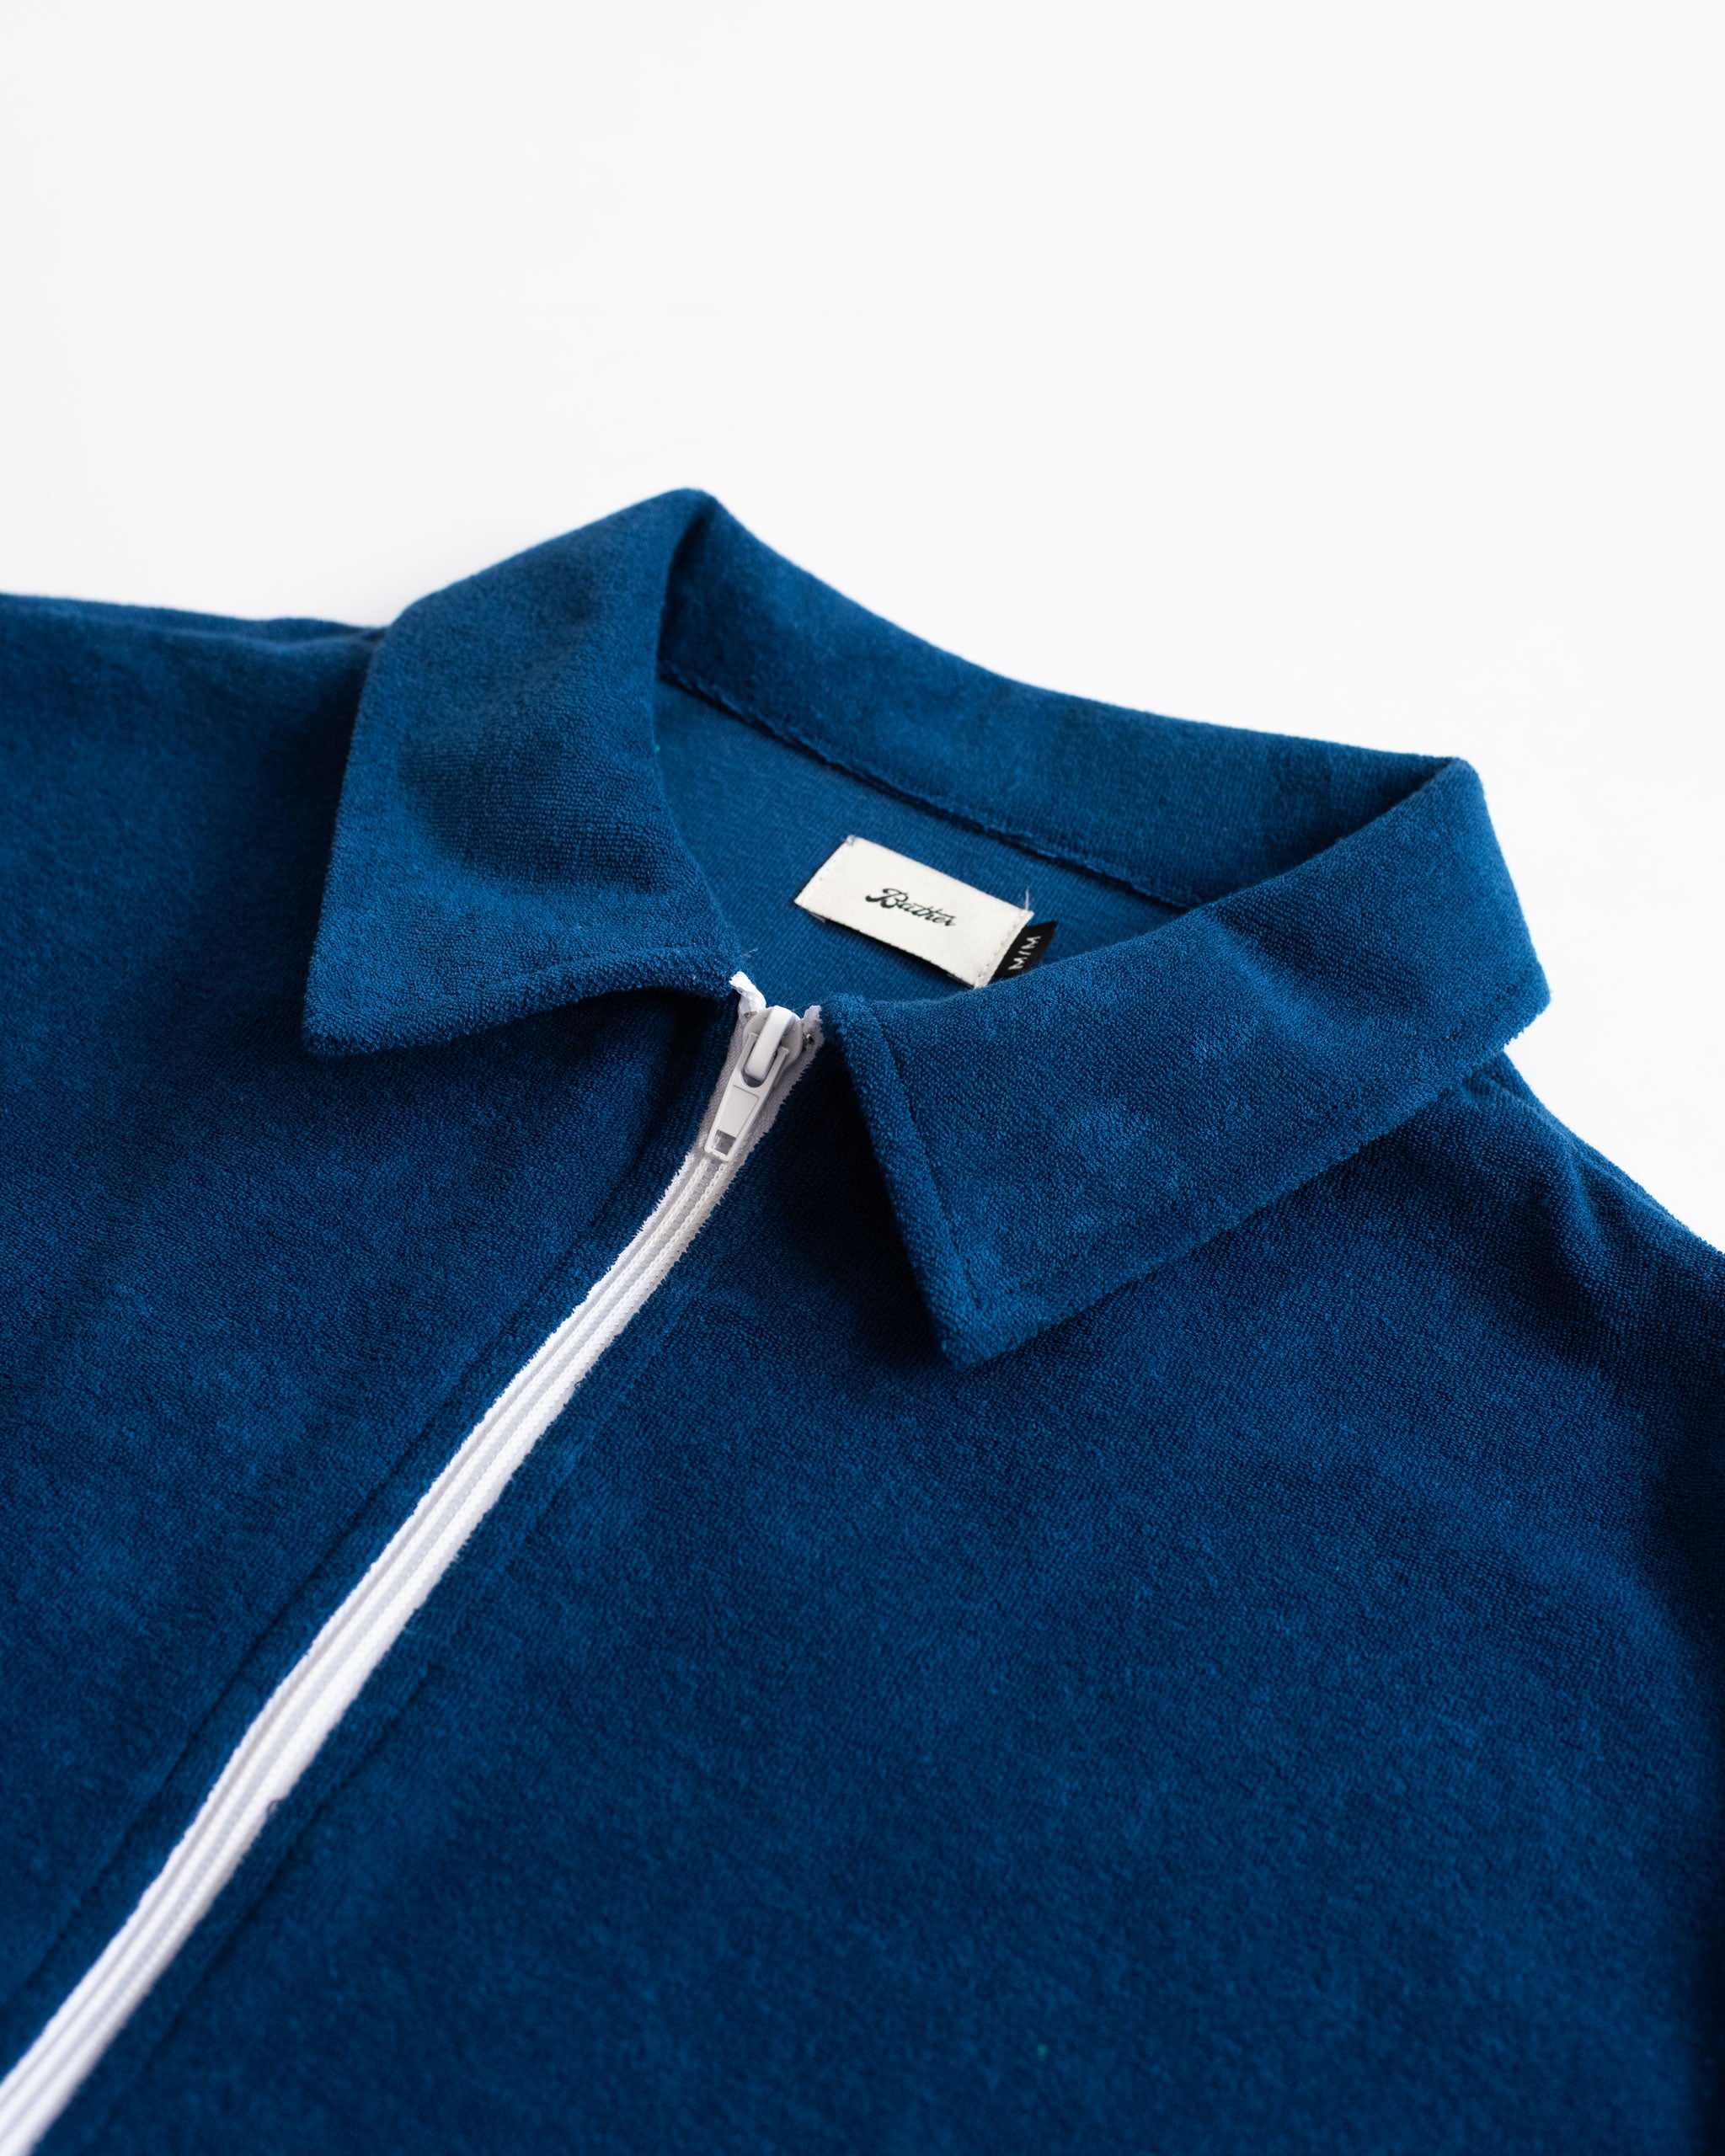 Collar Close Up of Solid Navy Towel Terry Cotton Full Zip Polo Shirt